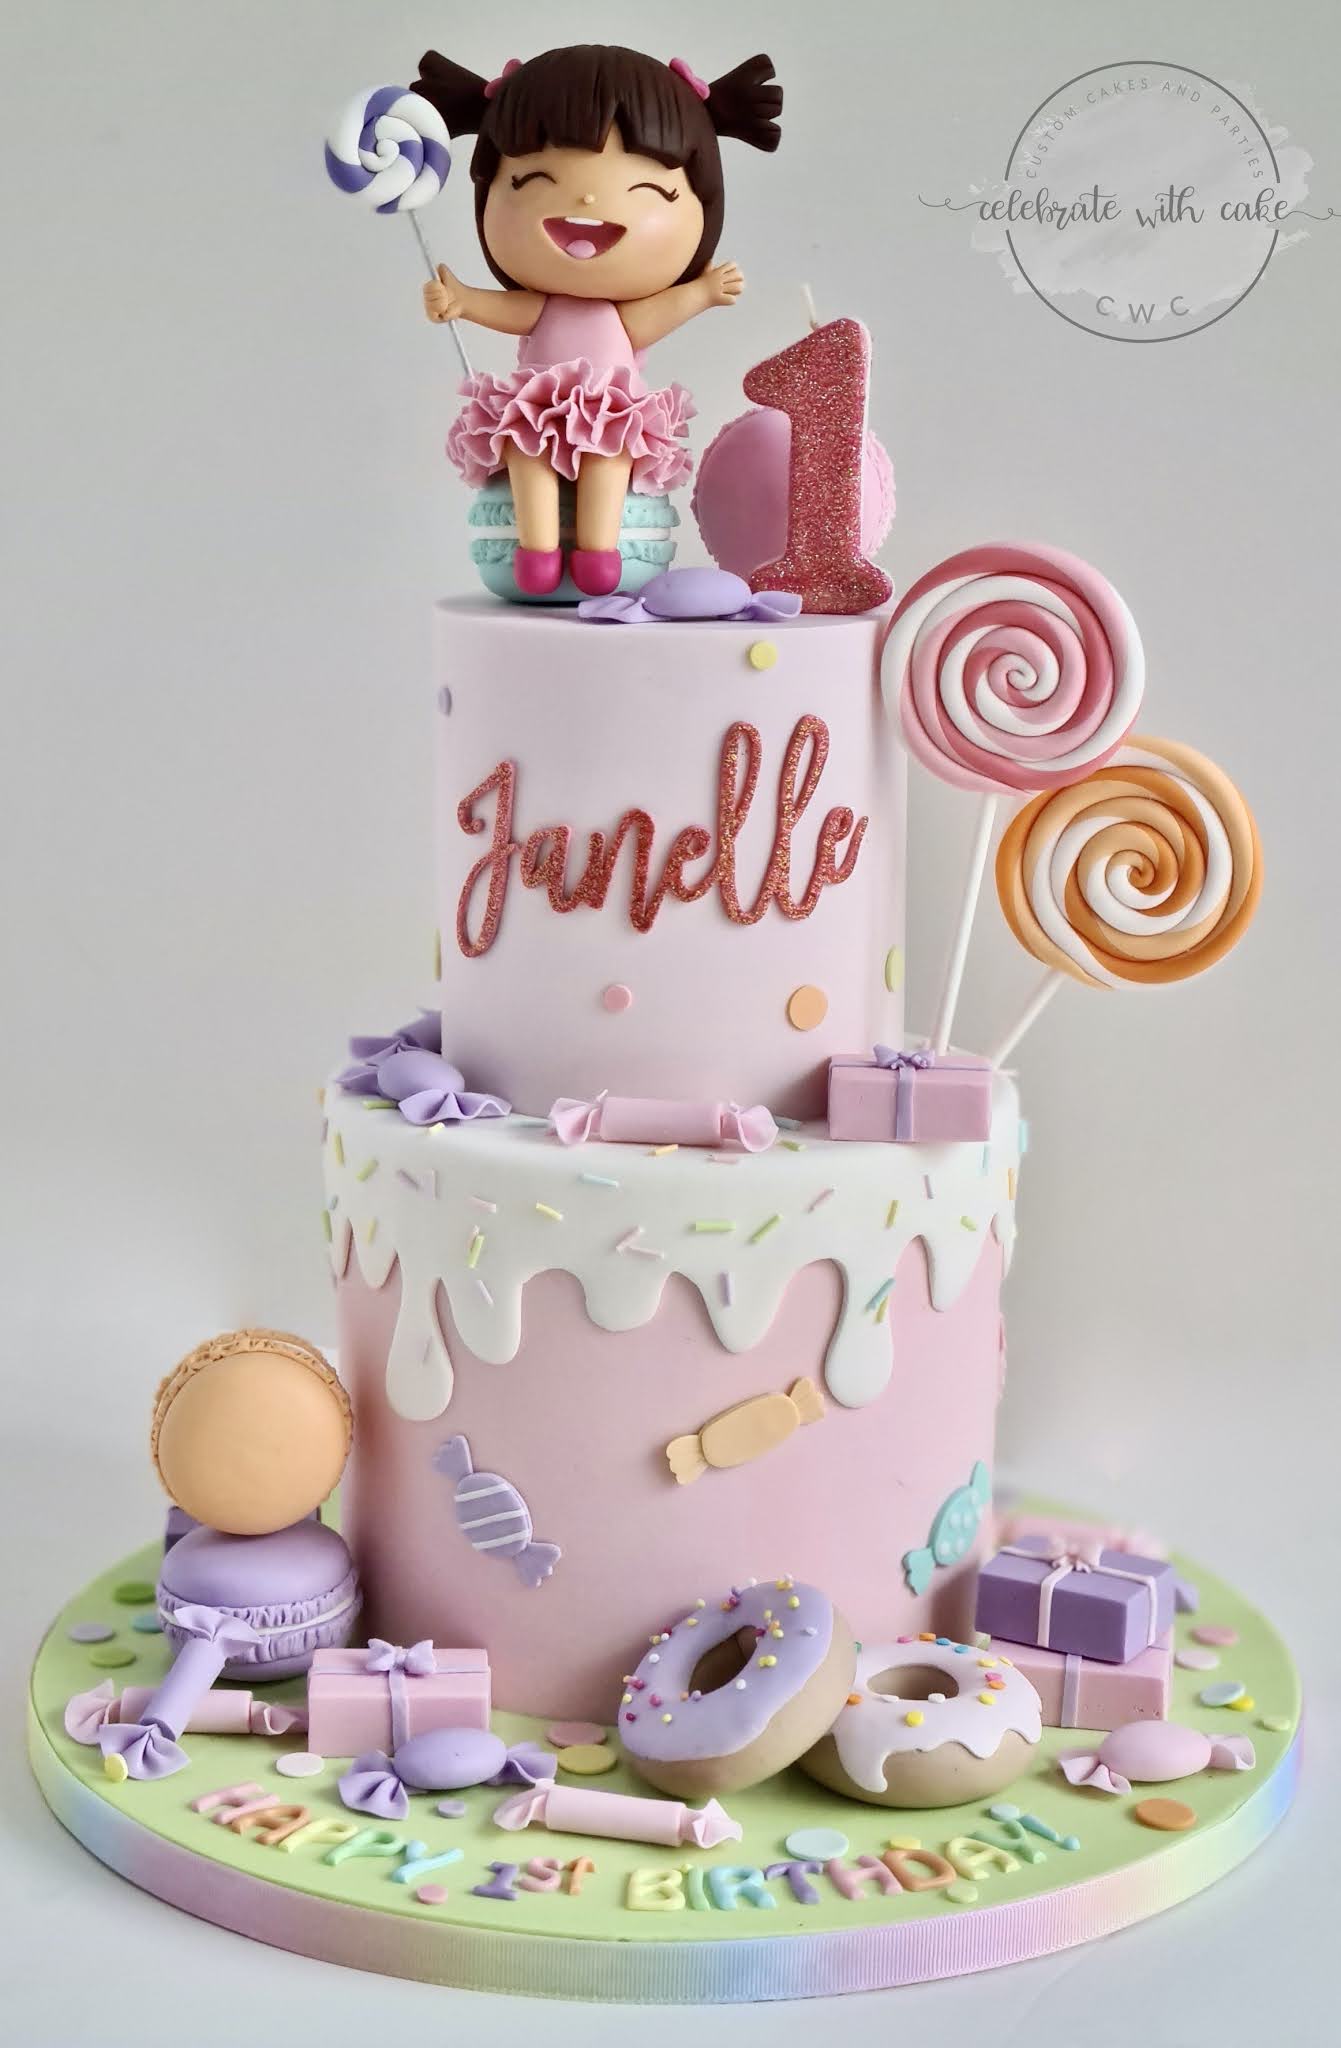 Celebrate with Cake! Girl in Candyland 1st birthday two